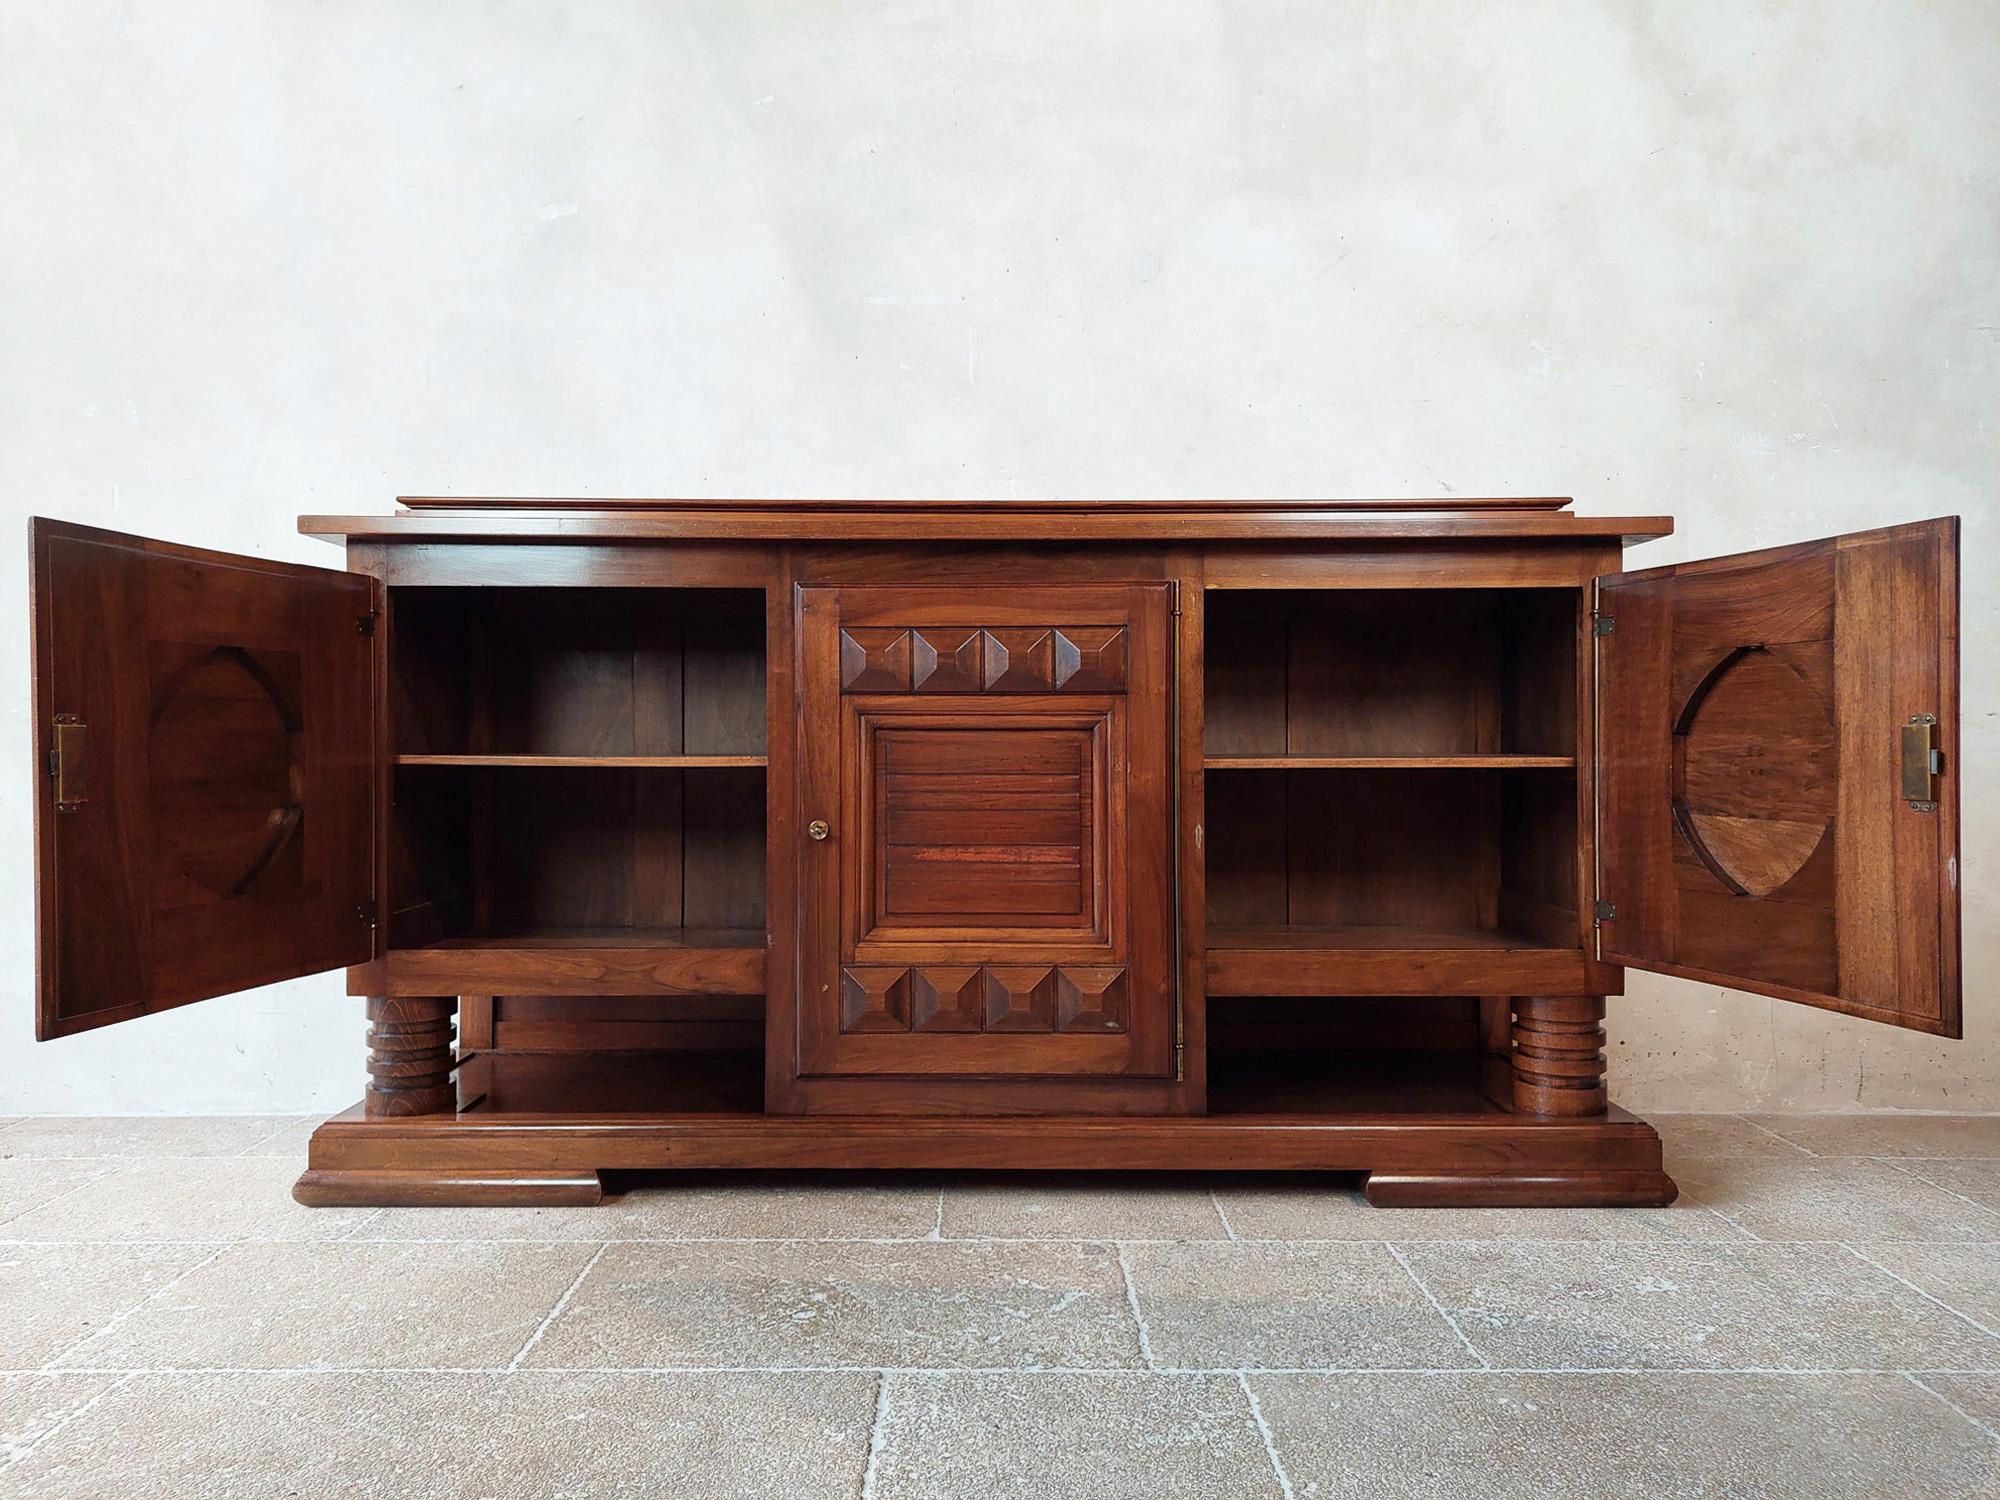 Walnut Sideboard by Charles Dudouyt in Brown with a Polished Finish, 1940s For Sale 2